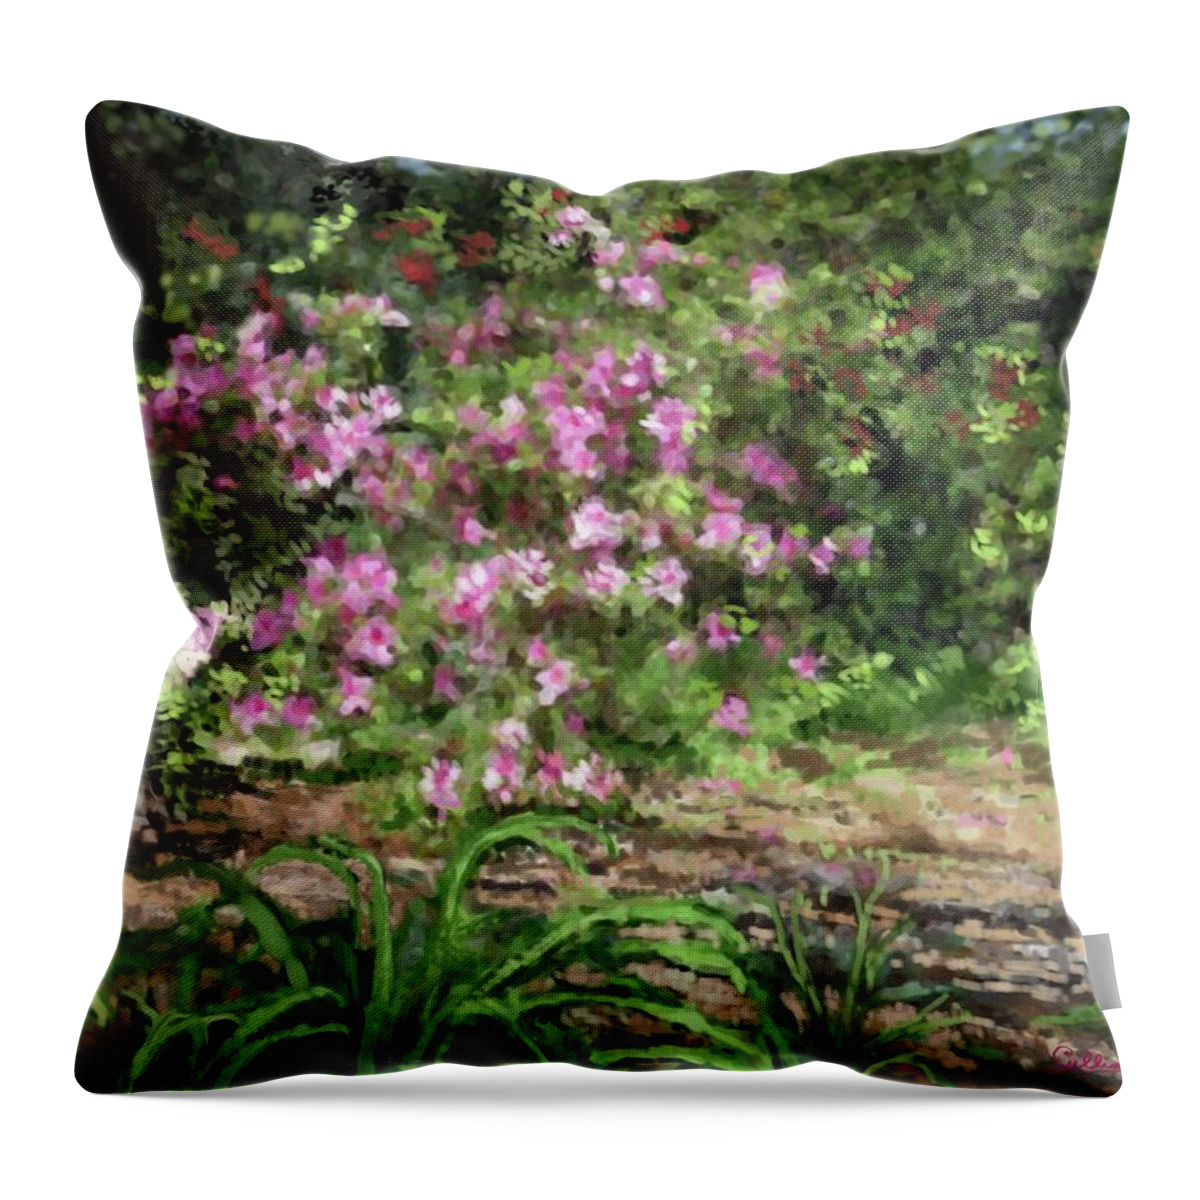 Landscape Throw Pillow featuring the digital art Pink Azaleas by Marilyn Cullingford